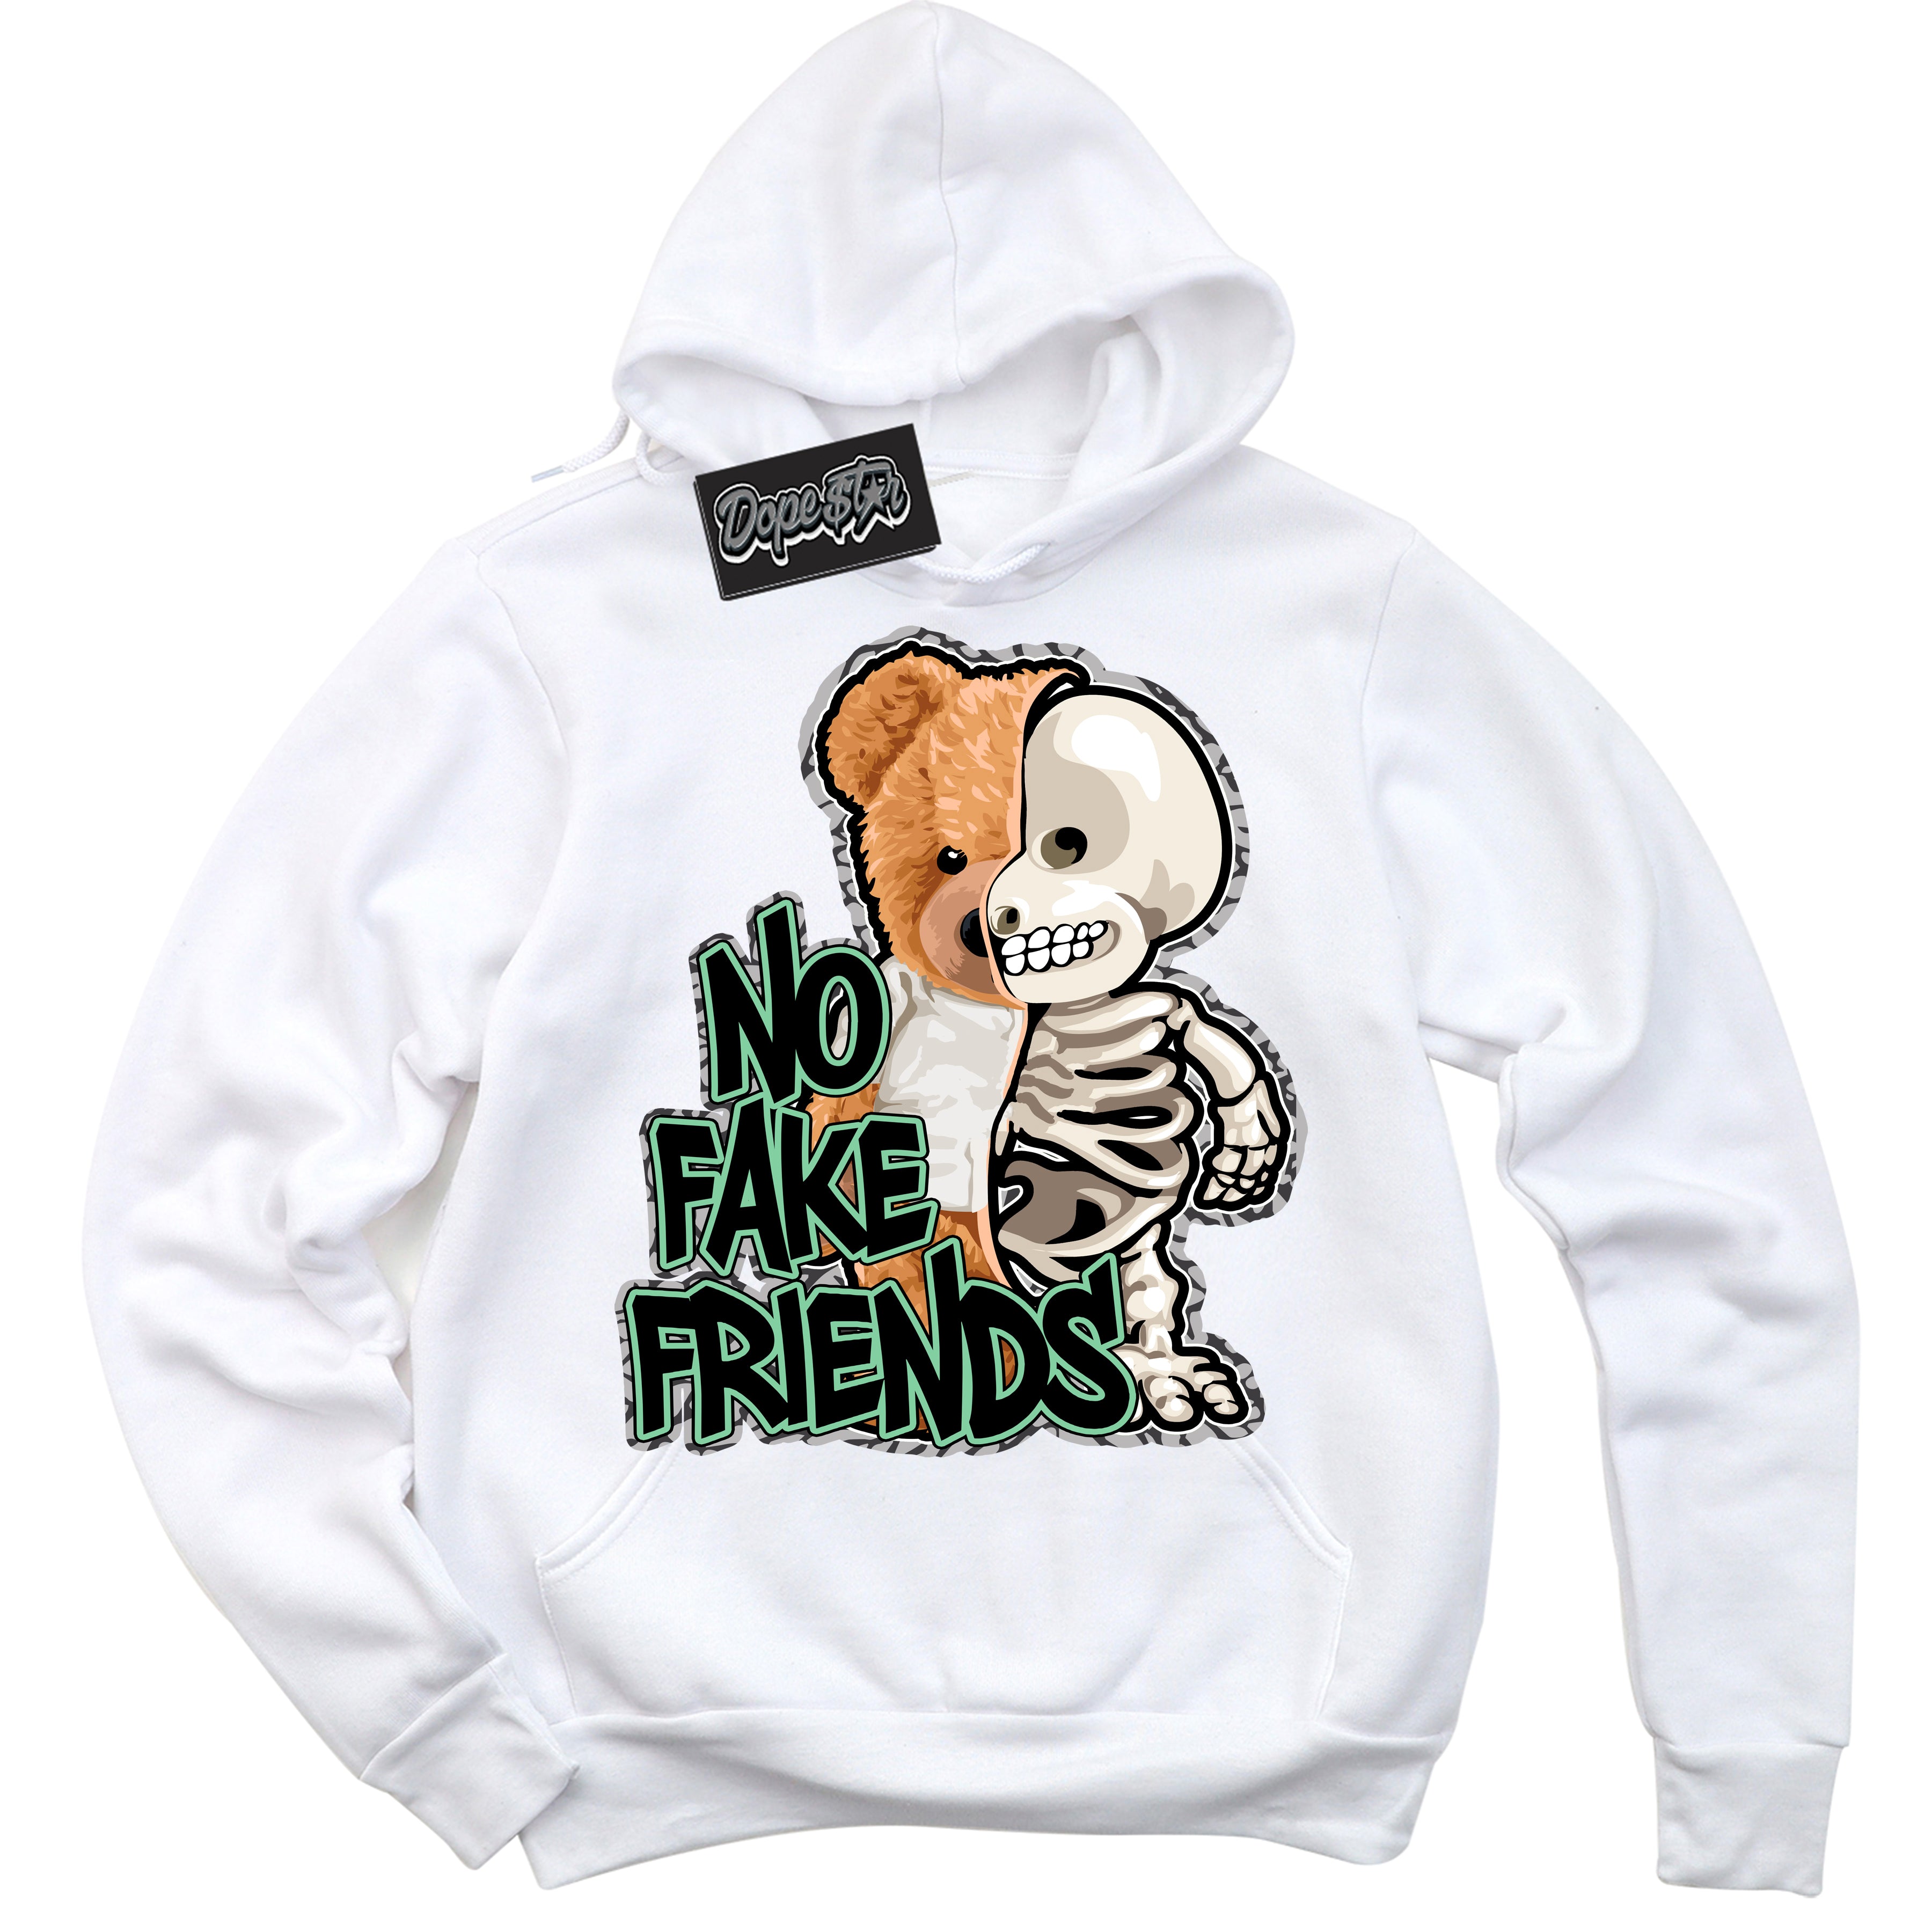 Cool White Graphic DopeStar Hoodie with “ No Fake Friends “ print, that perfectly matches Green Glow 3s sneakers